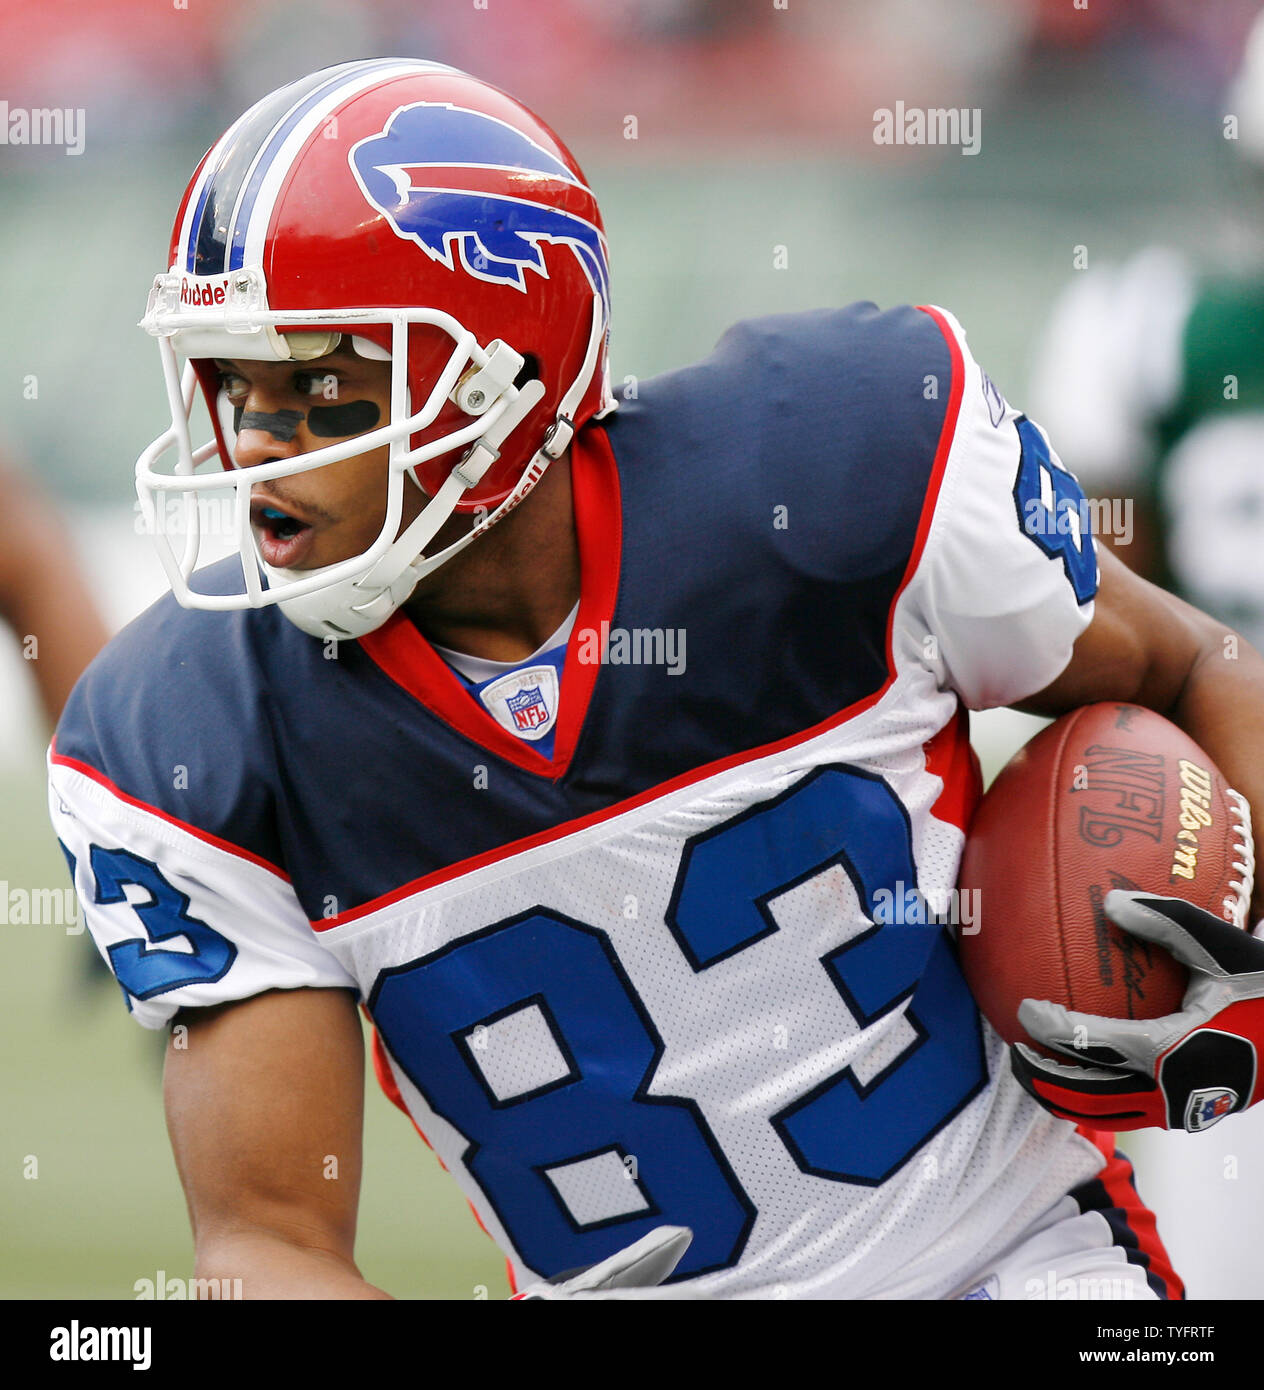 Buffalo Bills wide receiver Lee Evans moves the football up field at Giants  Stadium in East Rutherford, New Jersey on January 1, 2006. The New York  Jets defeated the Buffalo Bills 30-26. (